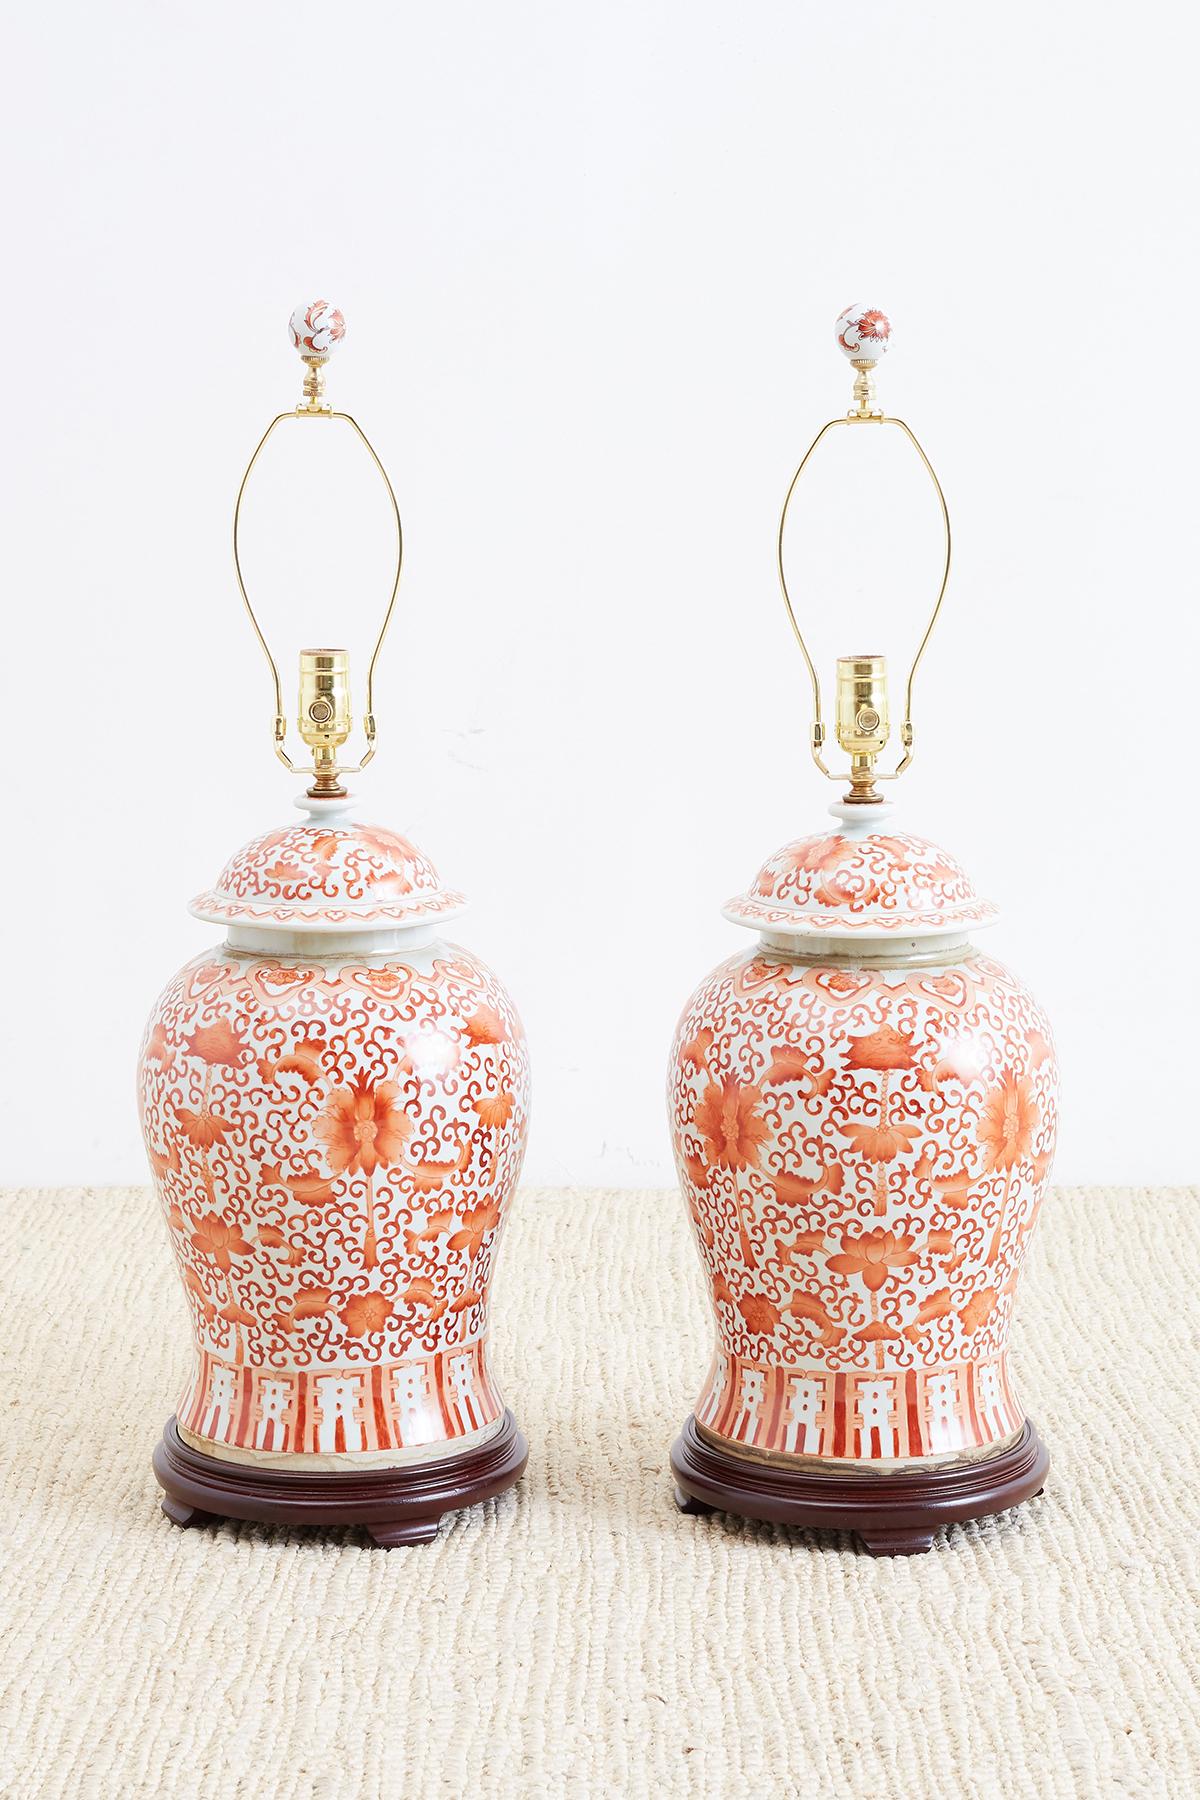 Exceptional pair of large Chinese porcelain hand-painted ginger jar table lamps. Featuring lidded jars decorated with lotus blossom and peonies. The background is a scrolling vine pattern and the flowers have a faded brick color. Rewired with new